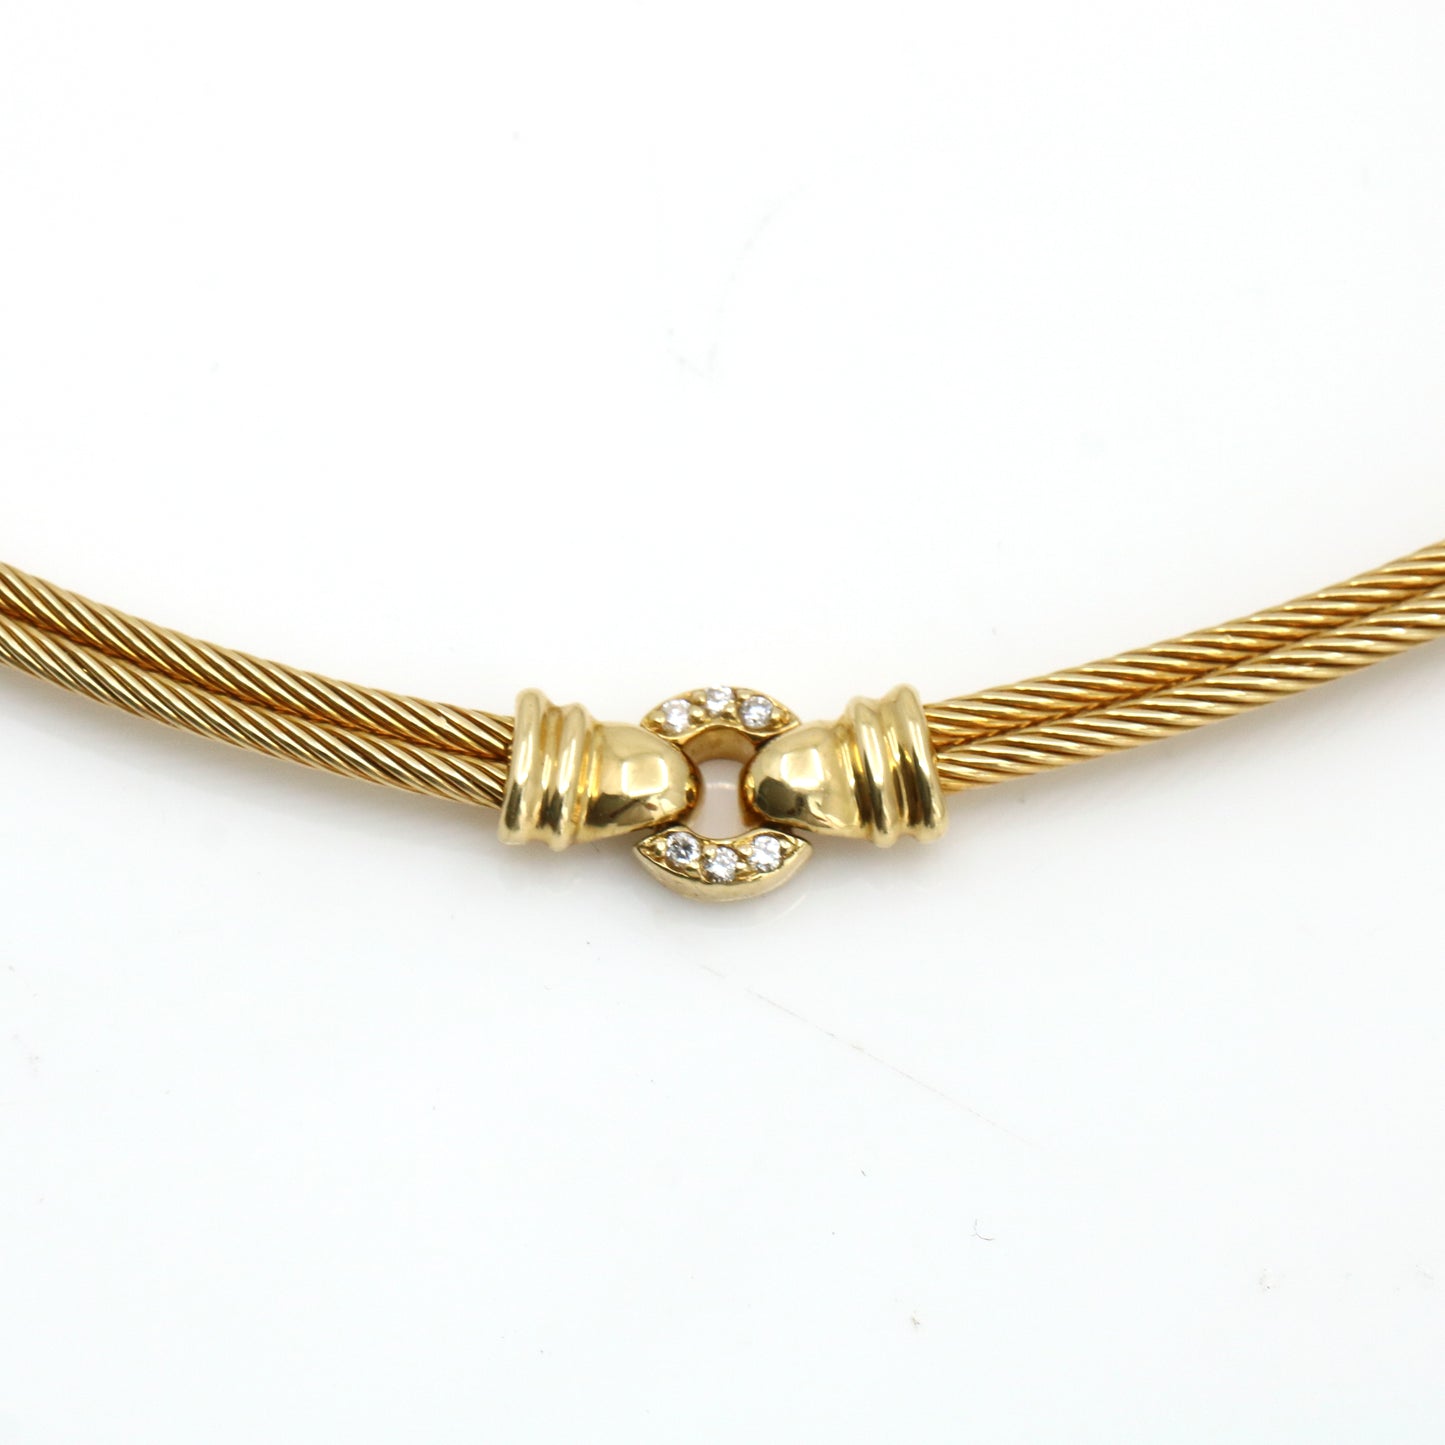 Charriol Diamond Cable Choker Necklace in 18k Yellow Gold